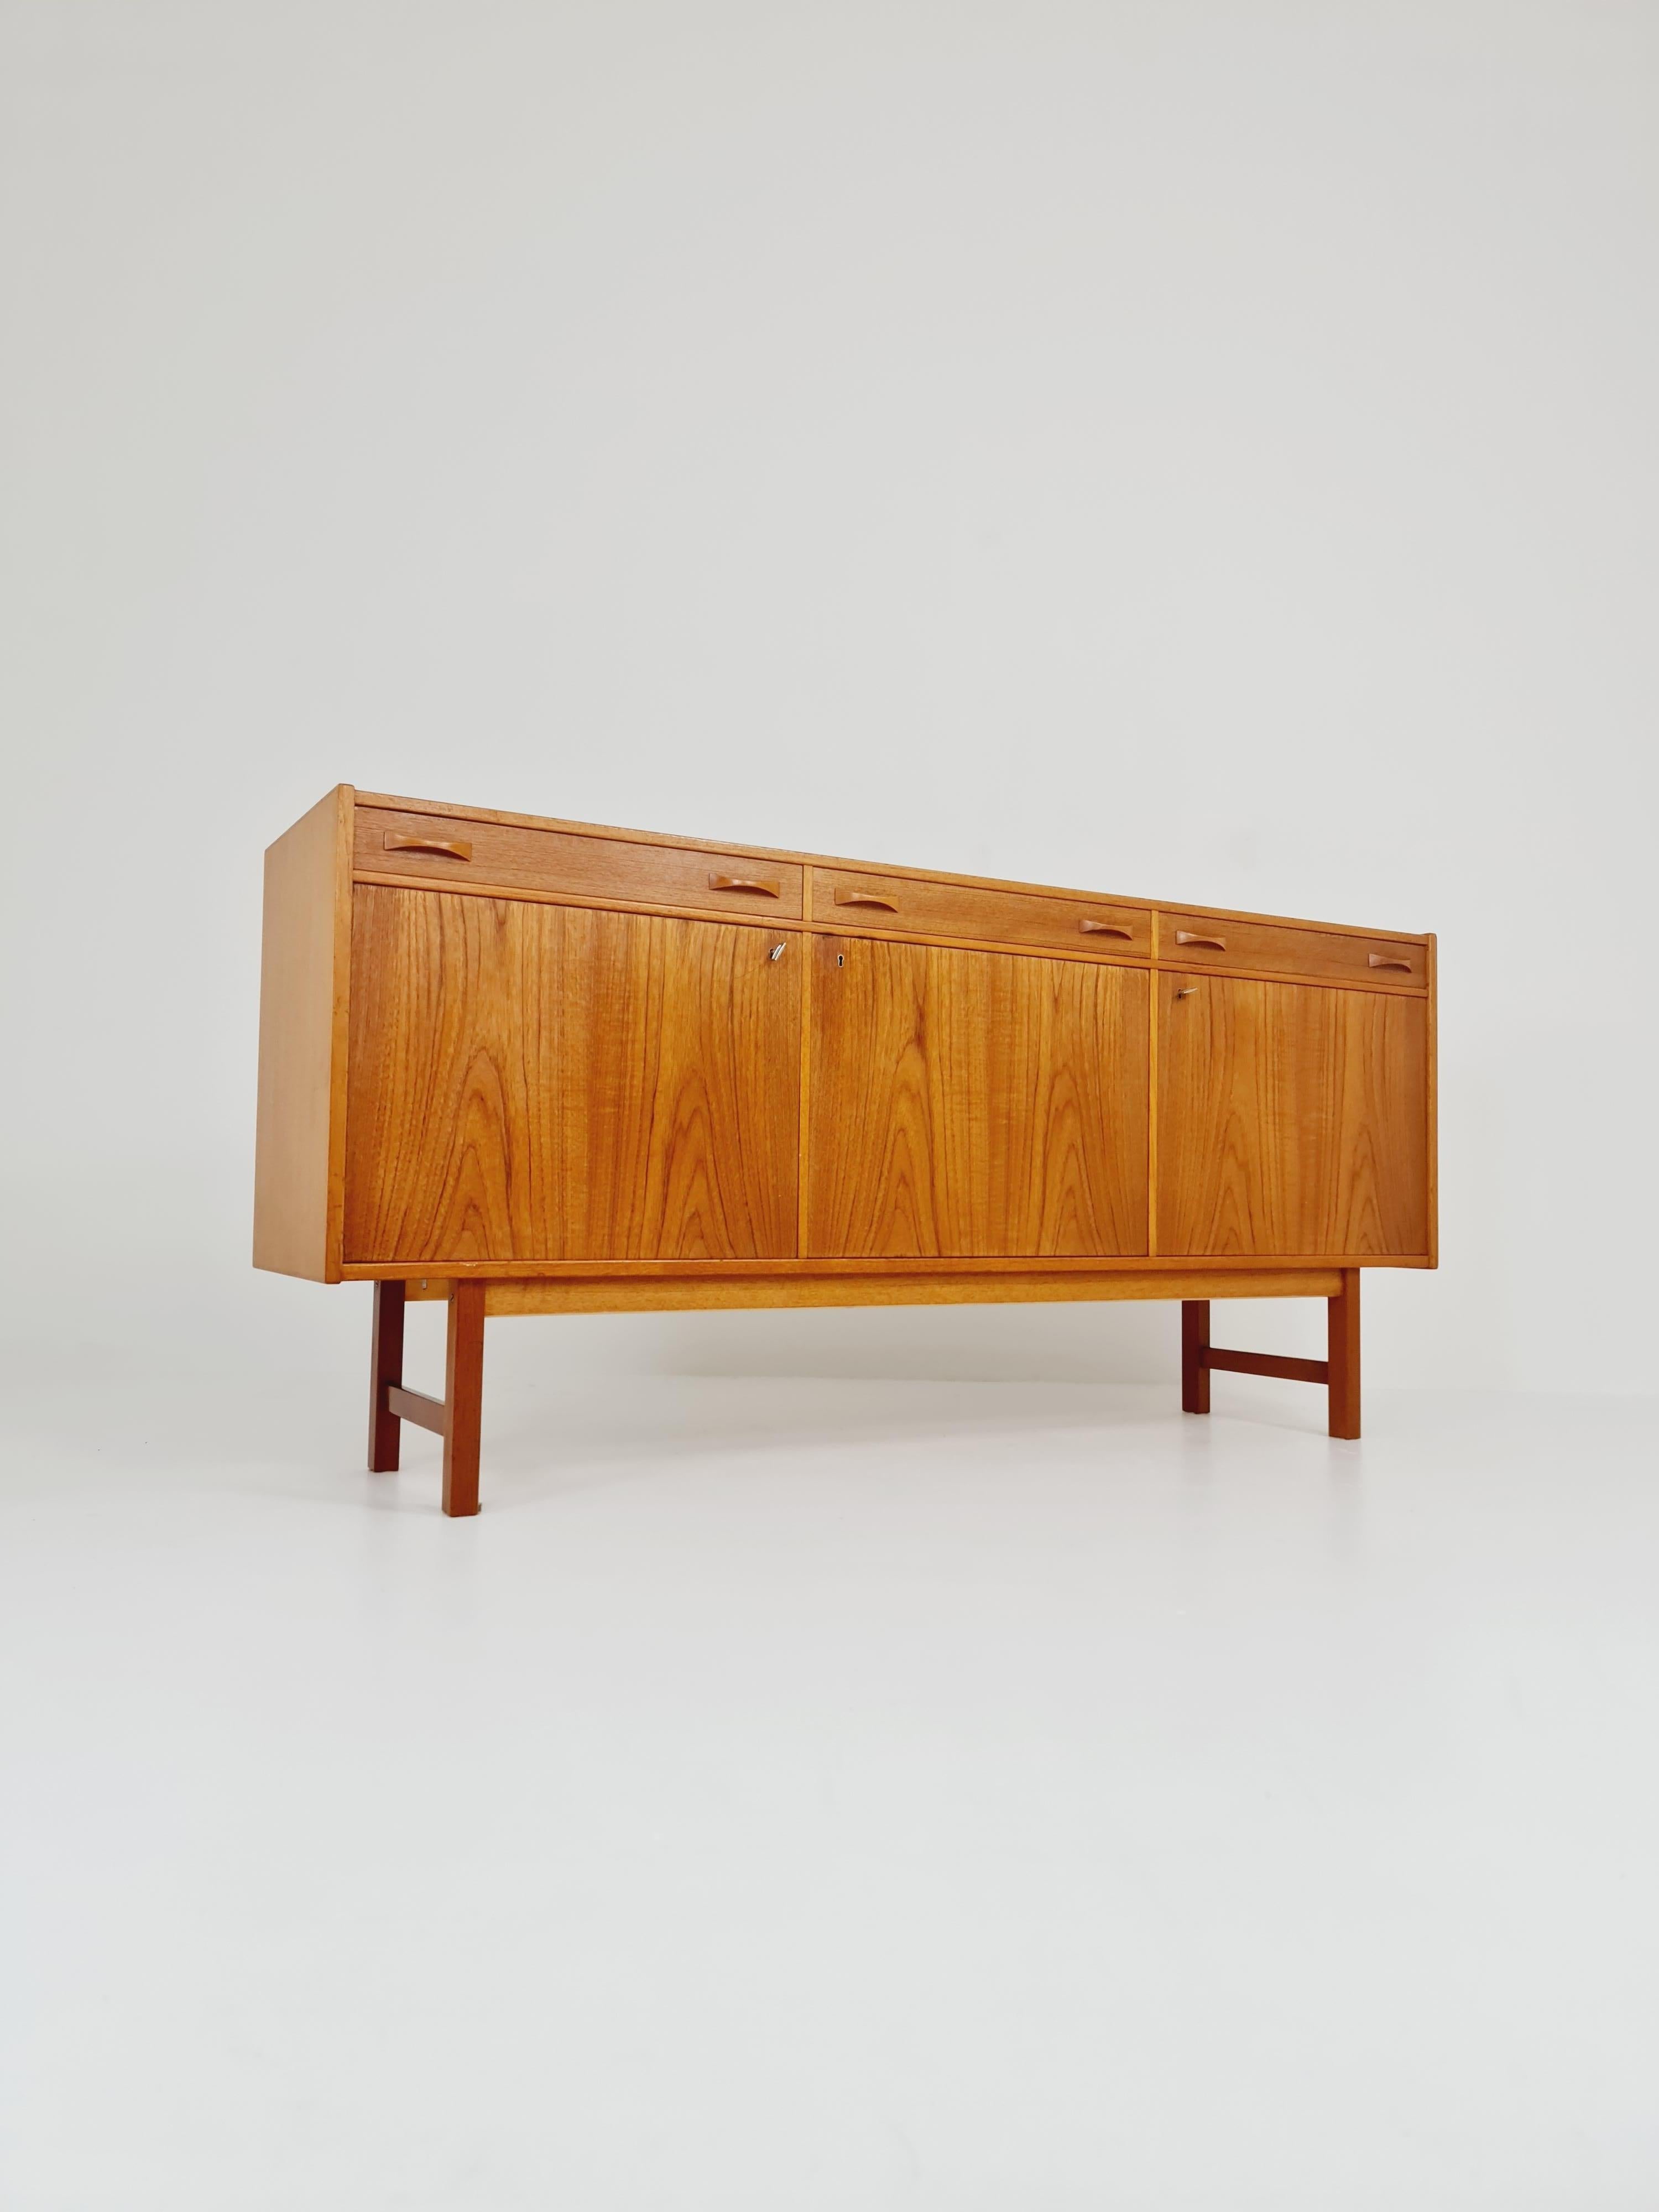 Mid century Swedish Teak Sideboard by Tage Olofsson for Ulferts, 1960s For Sale 3